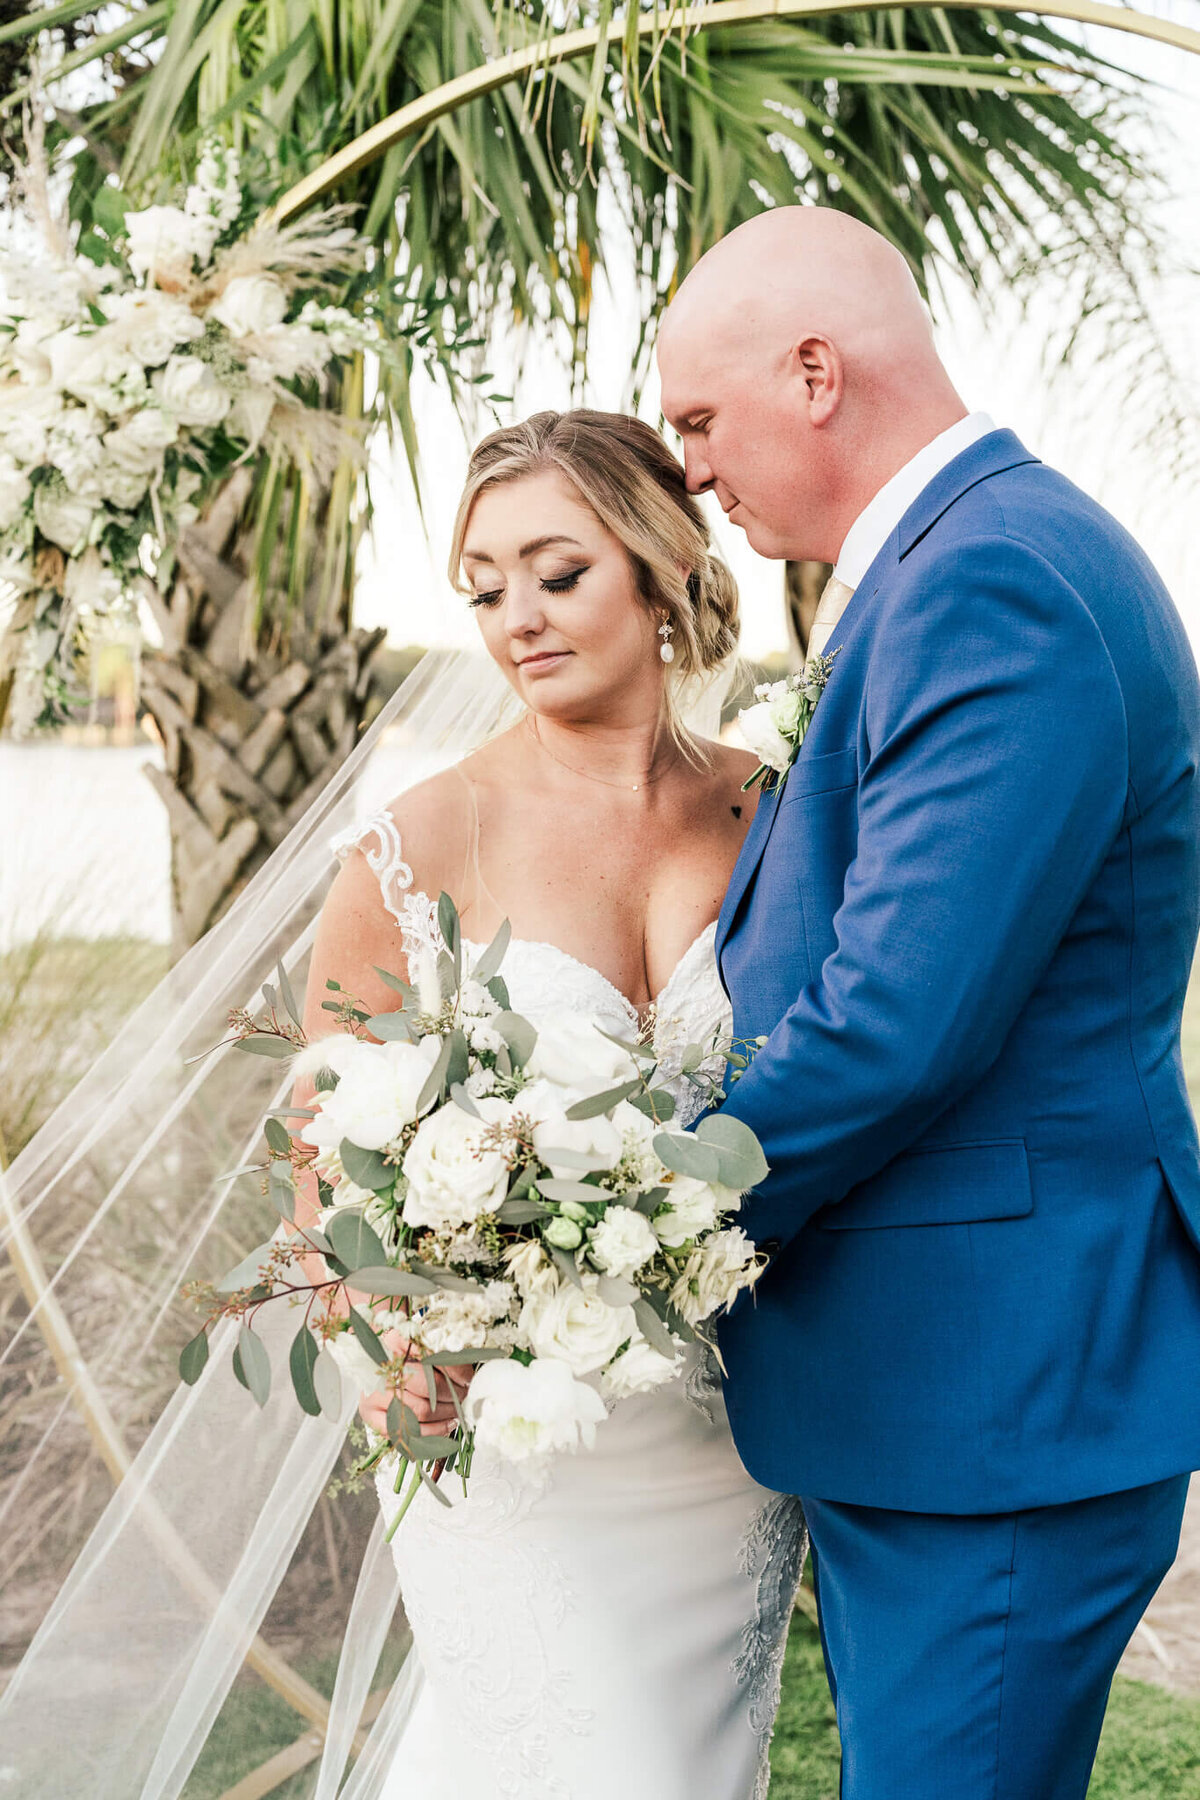 The-Gulf-Florida-Wedding-Photos-Video-Film-Megan-Chase-Sweet-Embrace-Bride-Groom-Looking-Down